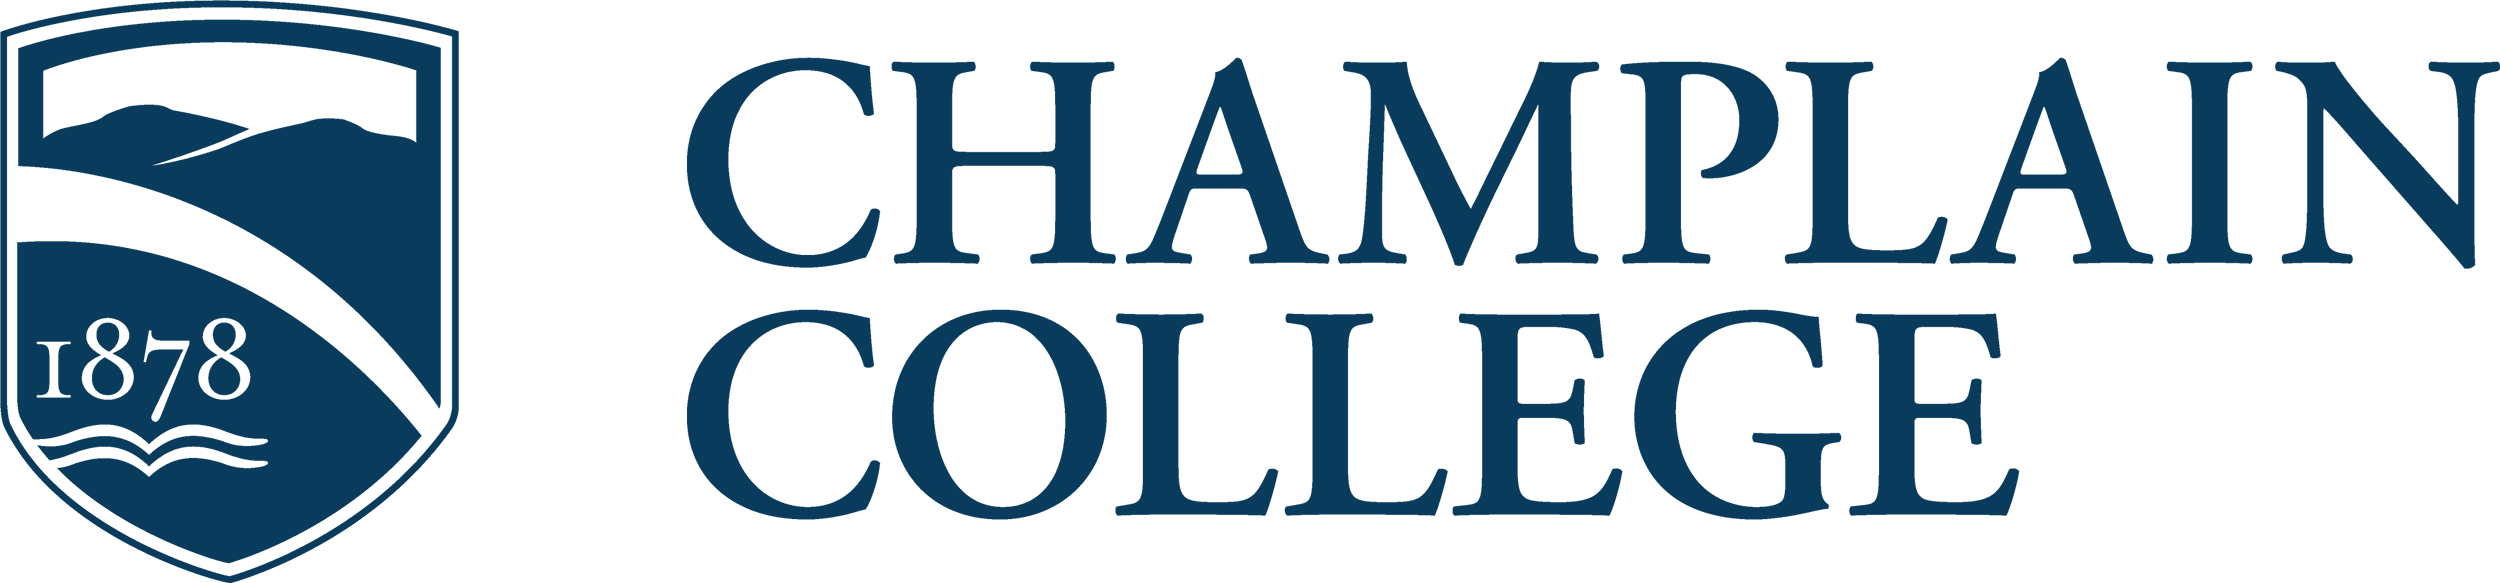 Primary Identity | Campus Services | Faculty & Staff | Champlain College